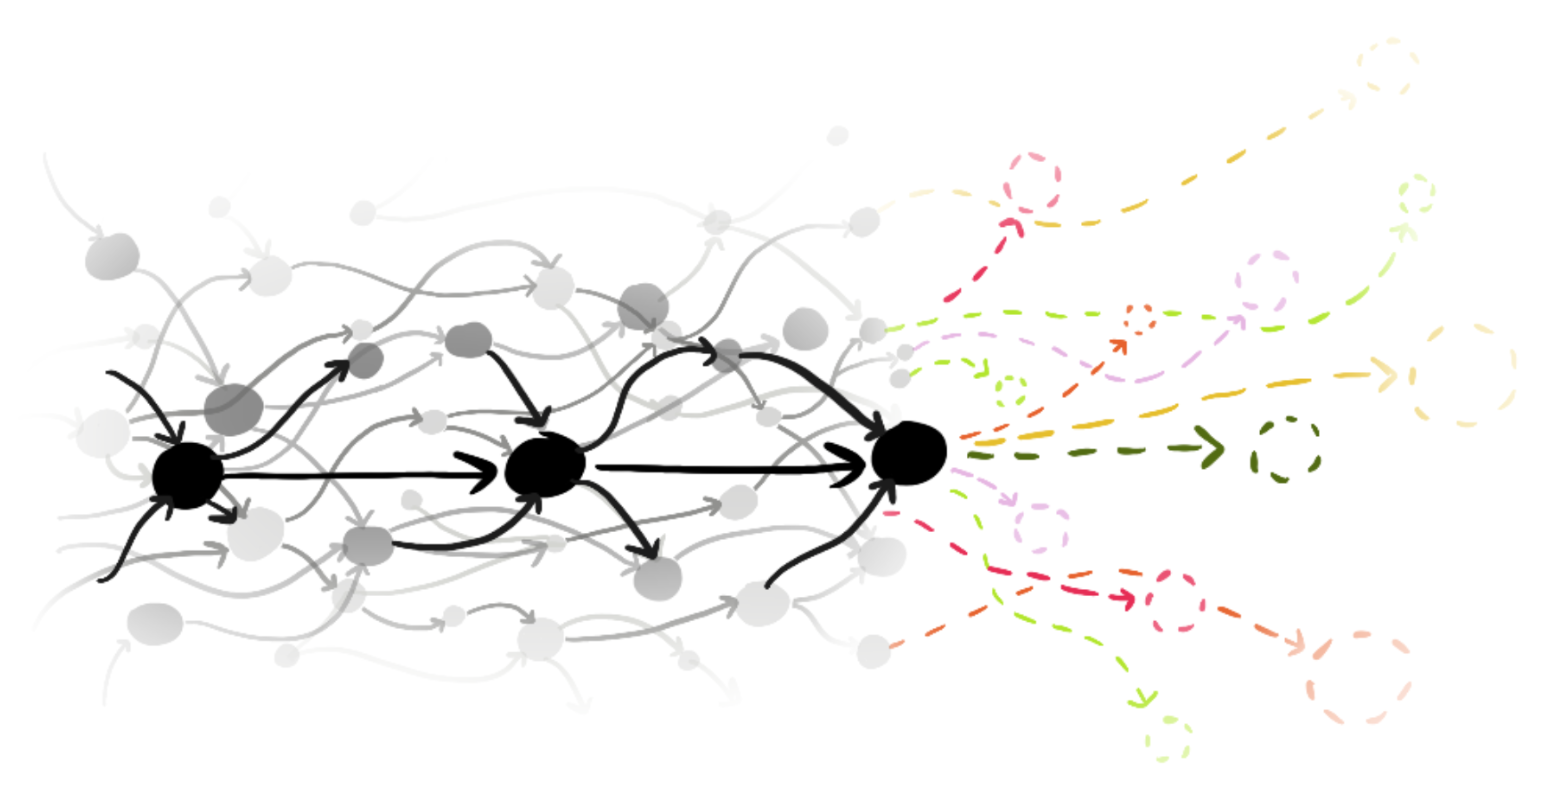 A web of overlapping circles in shades of gray, all connected with arrows connecting many circles to many others. To the right of the image, the black-and-white filled-in circles spill out into colorful dashed lines and colorful dashed outlines of different circles.